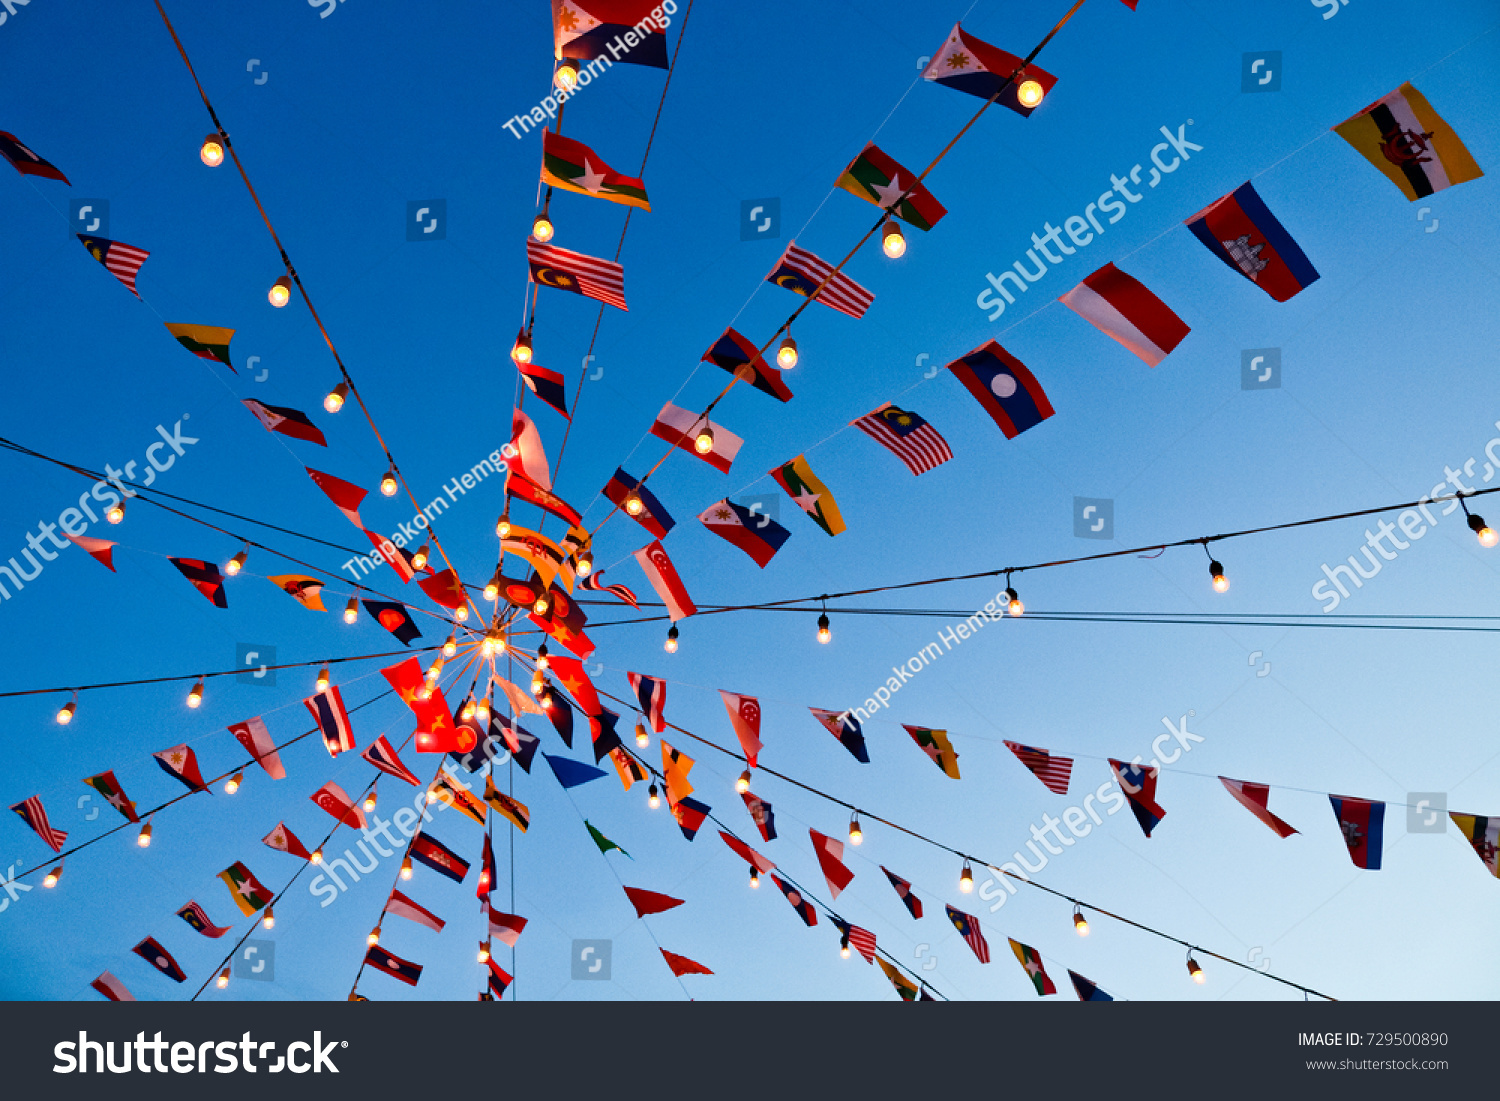 Different Flags of Southeast Asia countries, AEC, ASEAN Economic Community. That includes Vietnam, Thailand, Singapore, Malaysia, Philippines, Indonesia, Cambodia, Laos, Myanmar, and Brunei)  #729500890